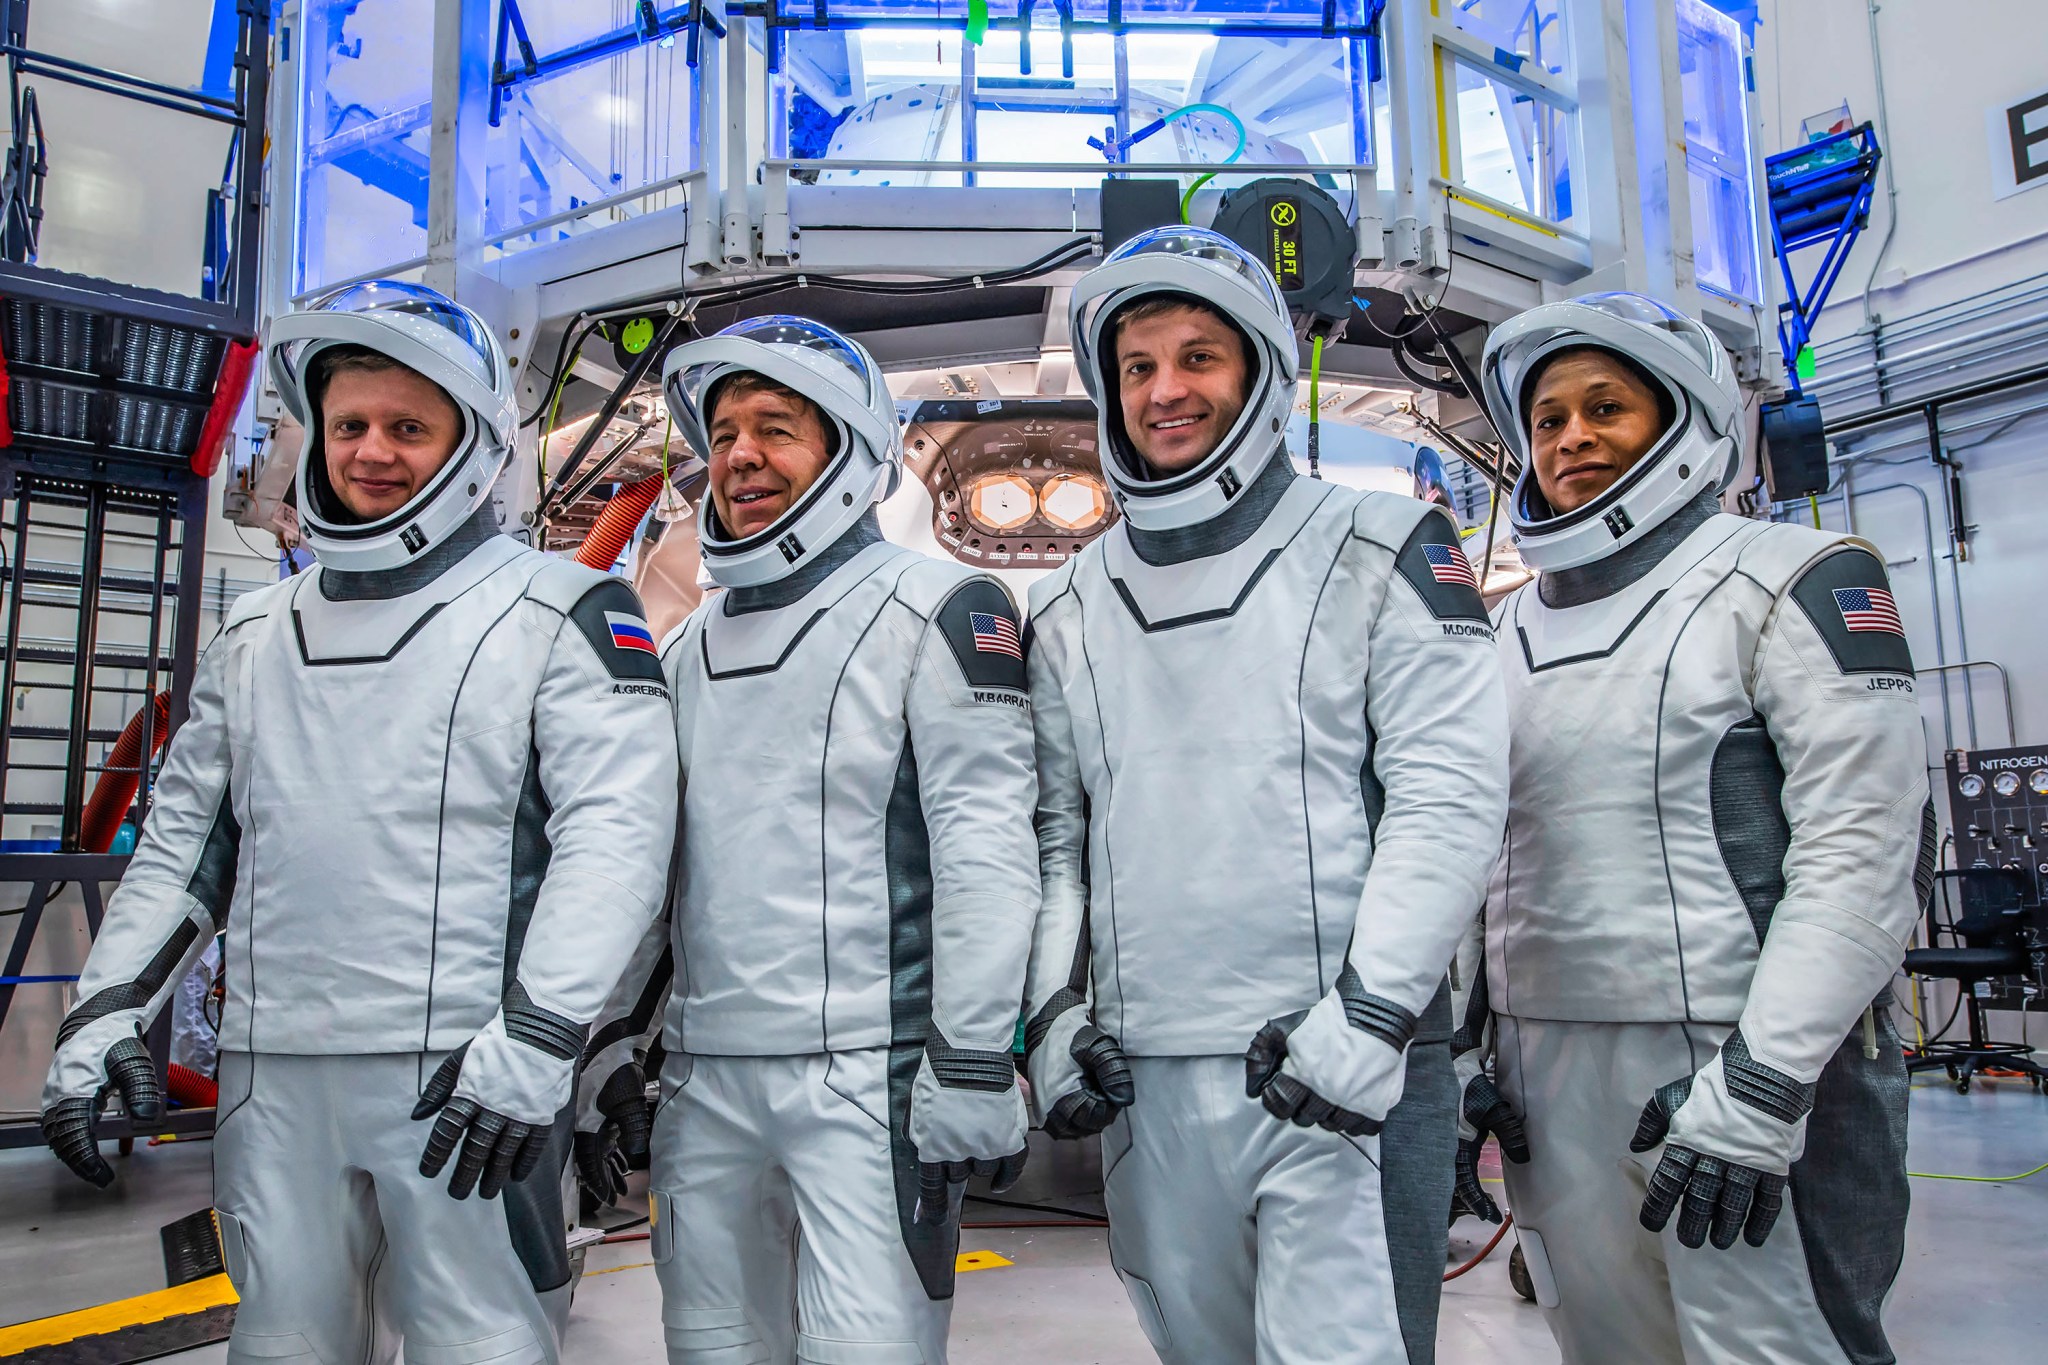 NASA announces the schedule for their coverage of the upcoming SpaceX Crew-8 launch and docking, providing detailed updates on the mission.